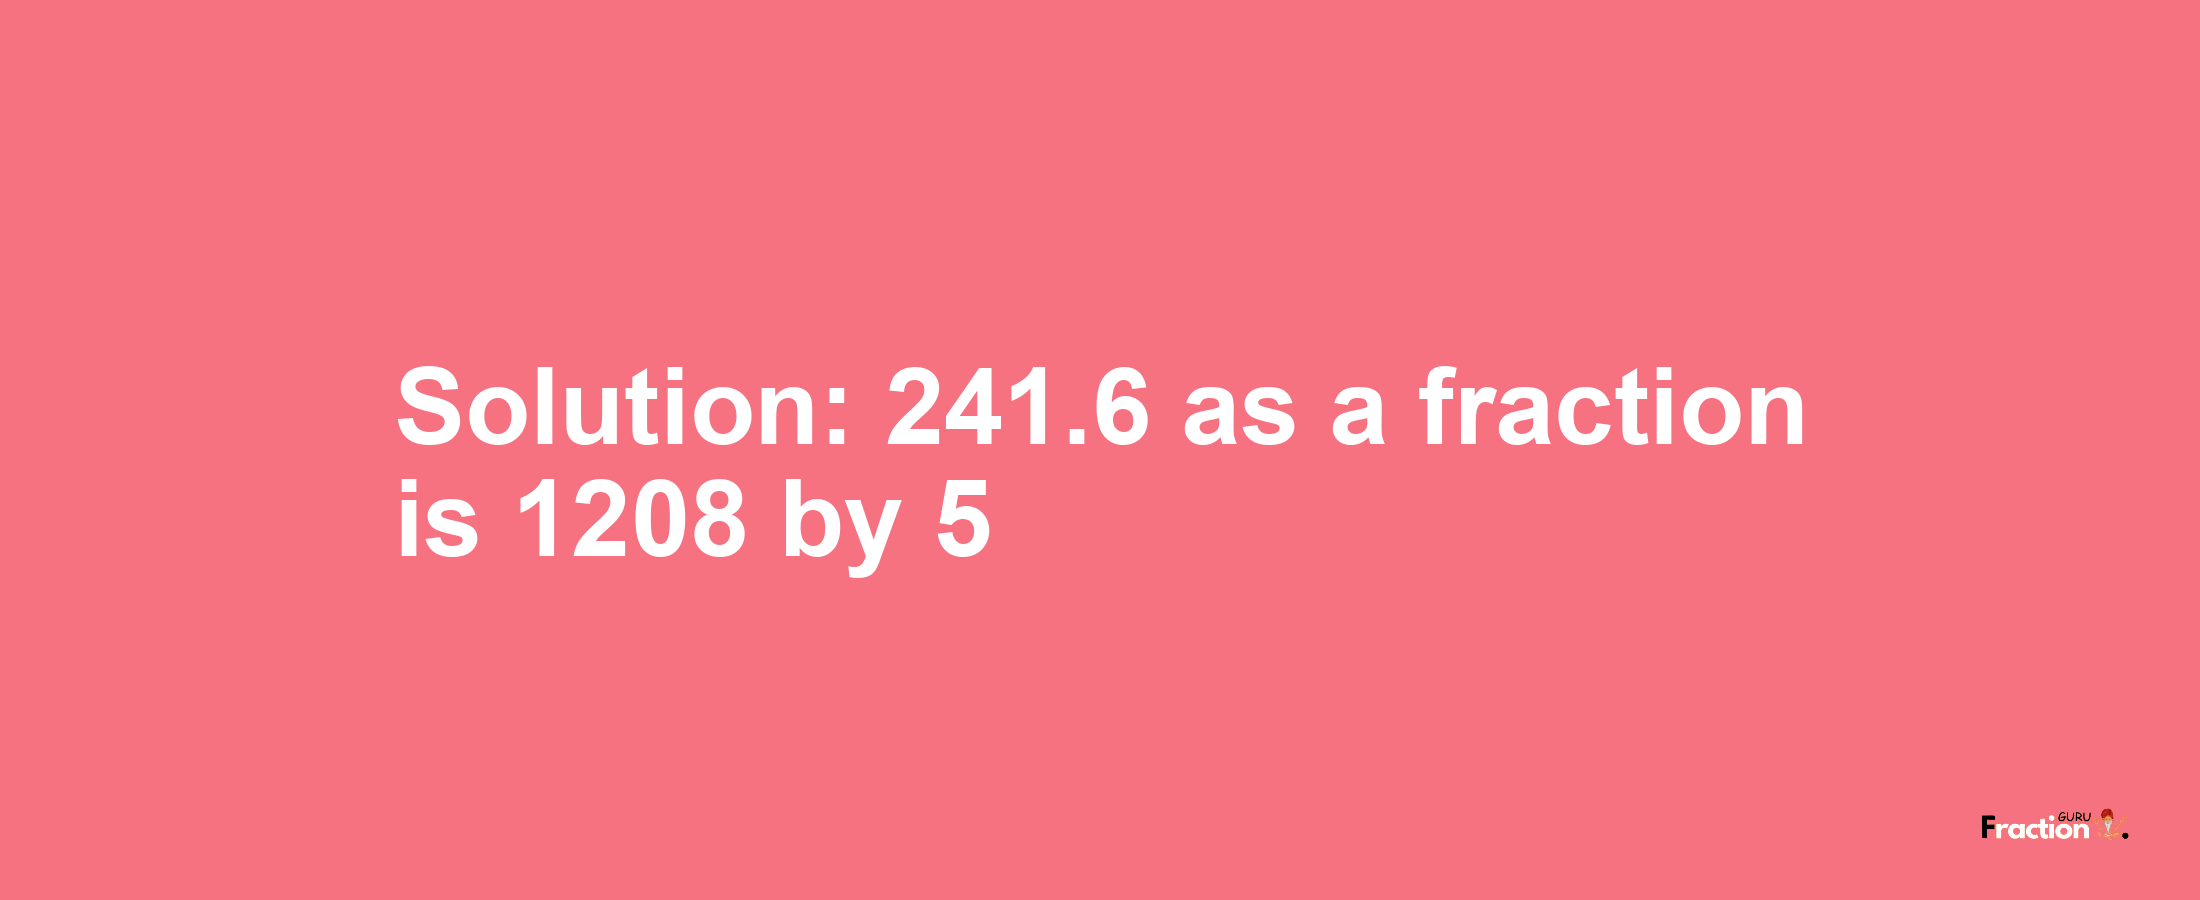 Solution:241.6 as a fraction is 1208/5